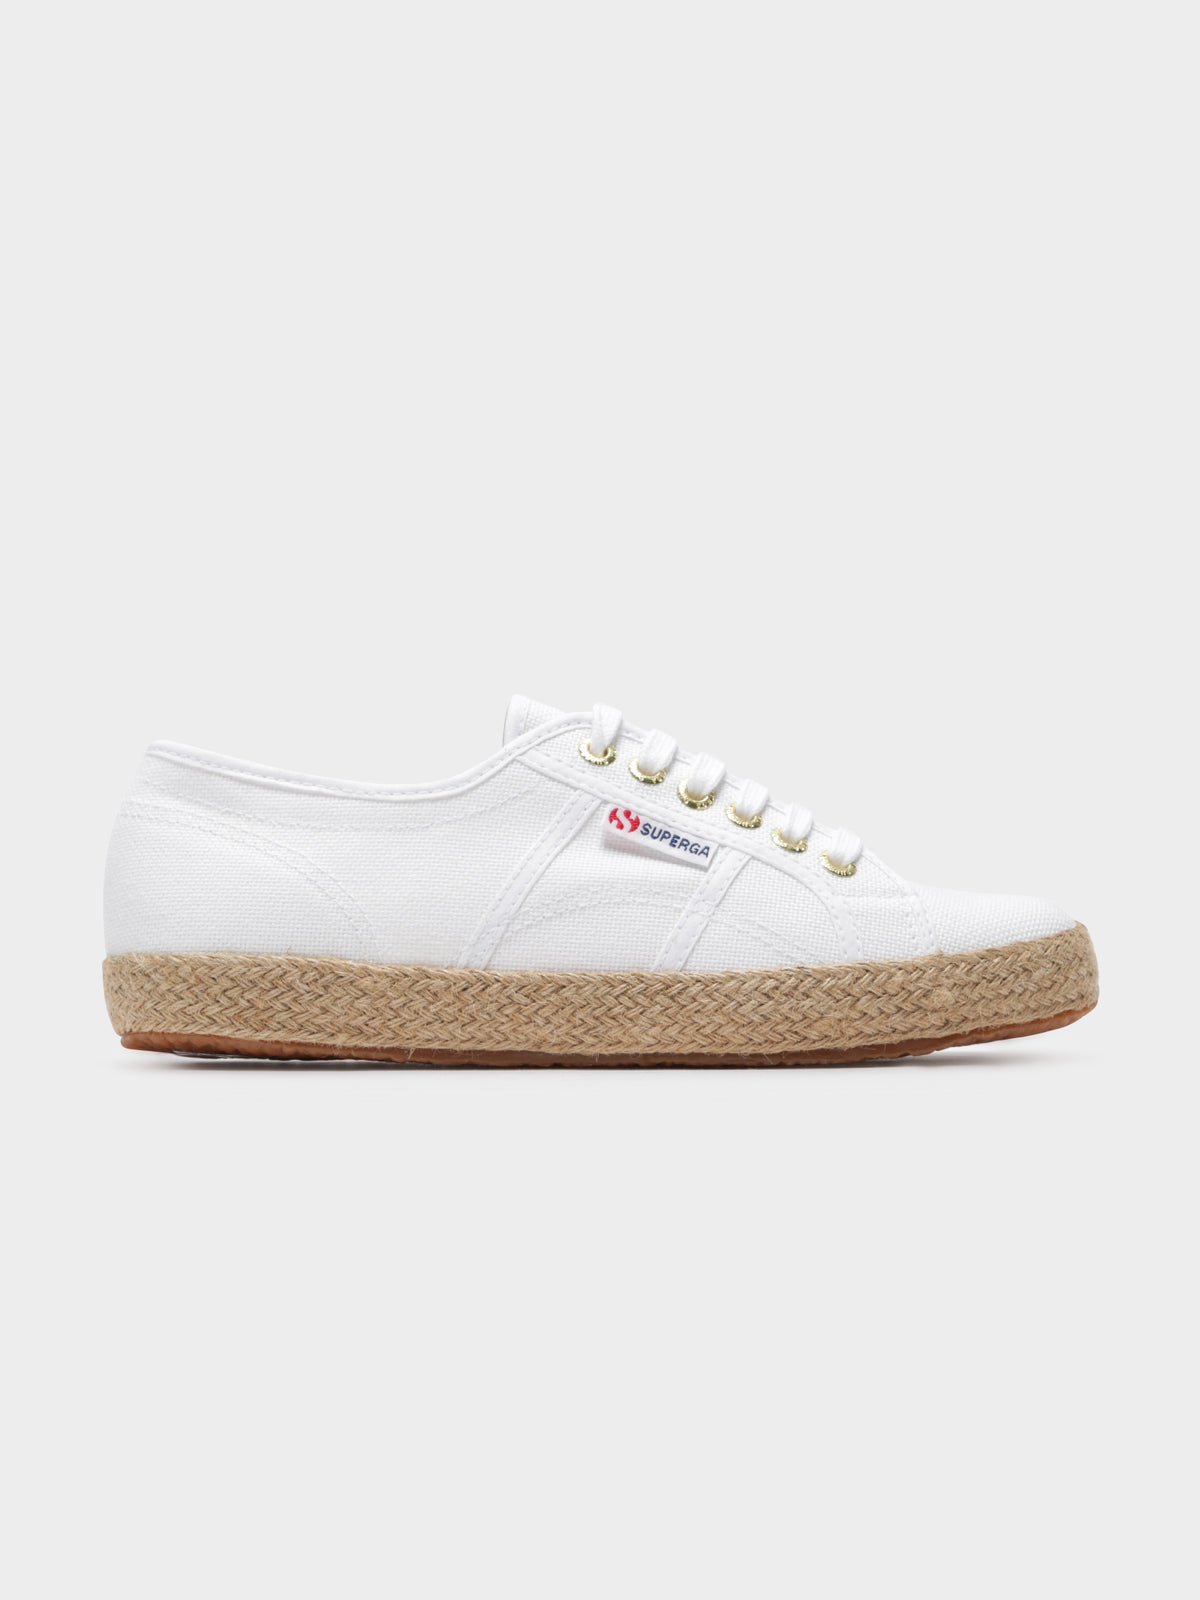 Womens 2750 Cotropeu Sneakers in White